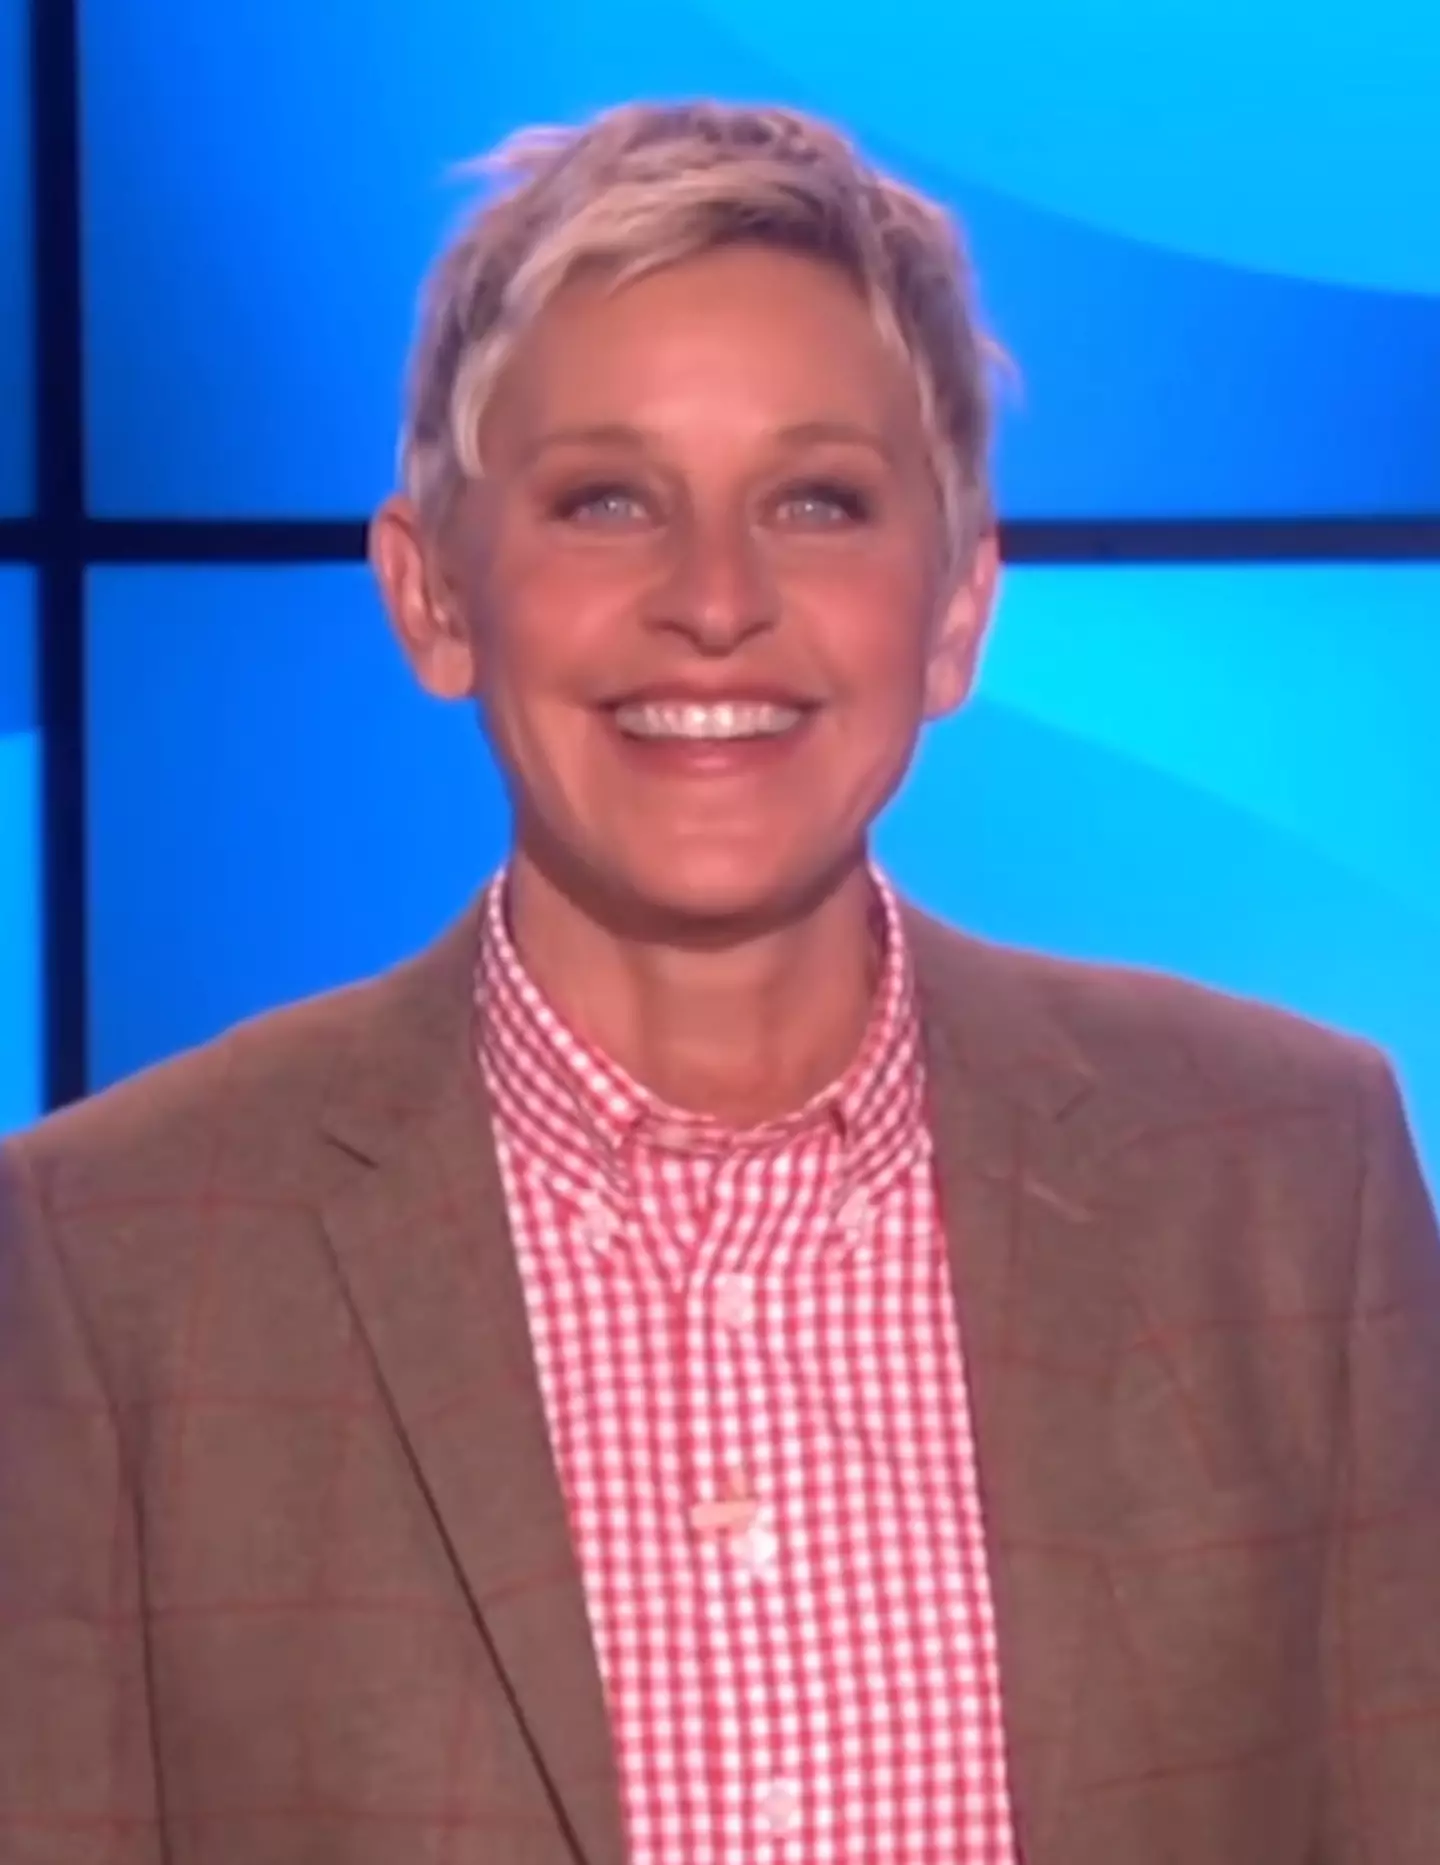 The comedian has recently embarked on a new comedy tour. (The Ellen DeGeneres Show)